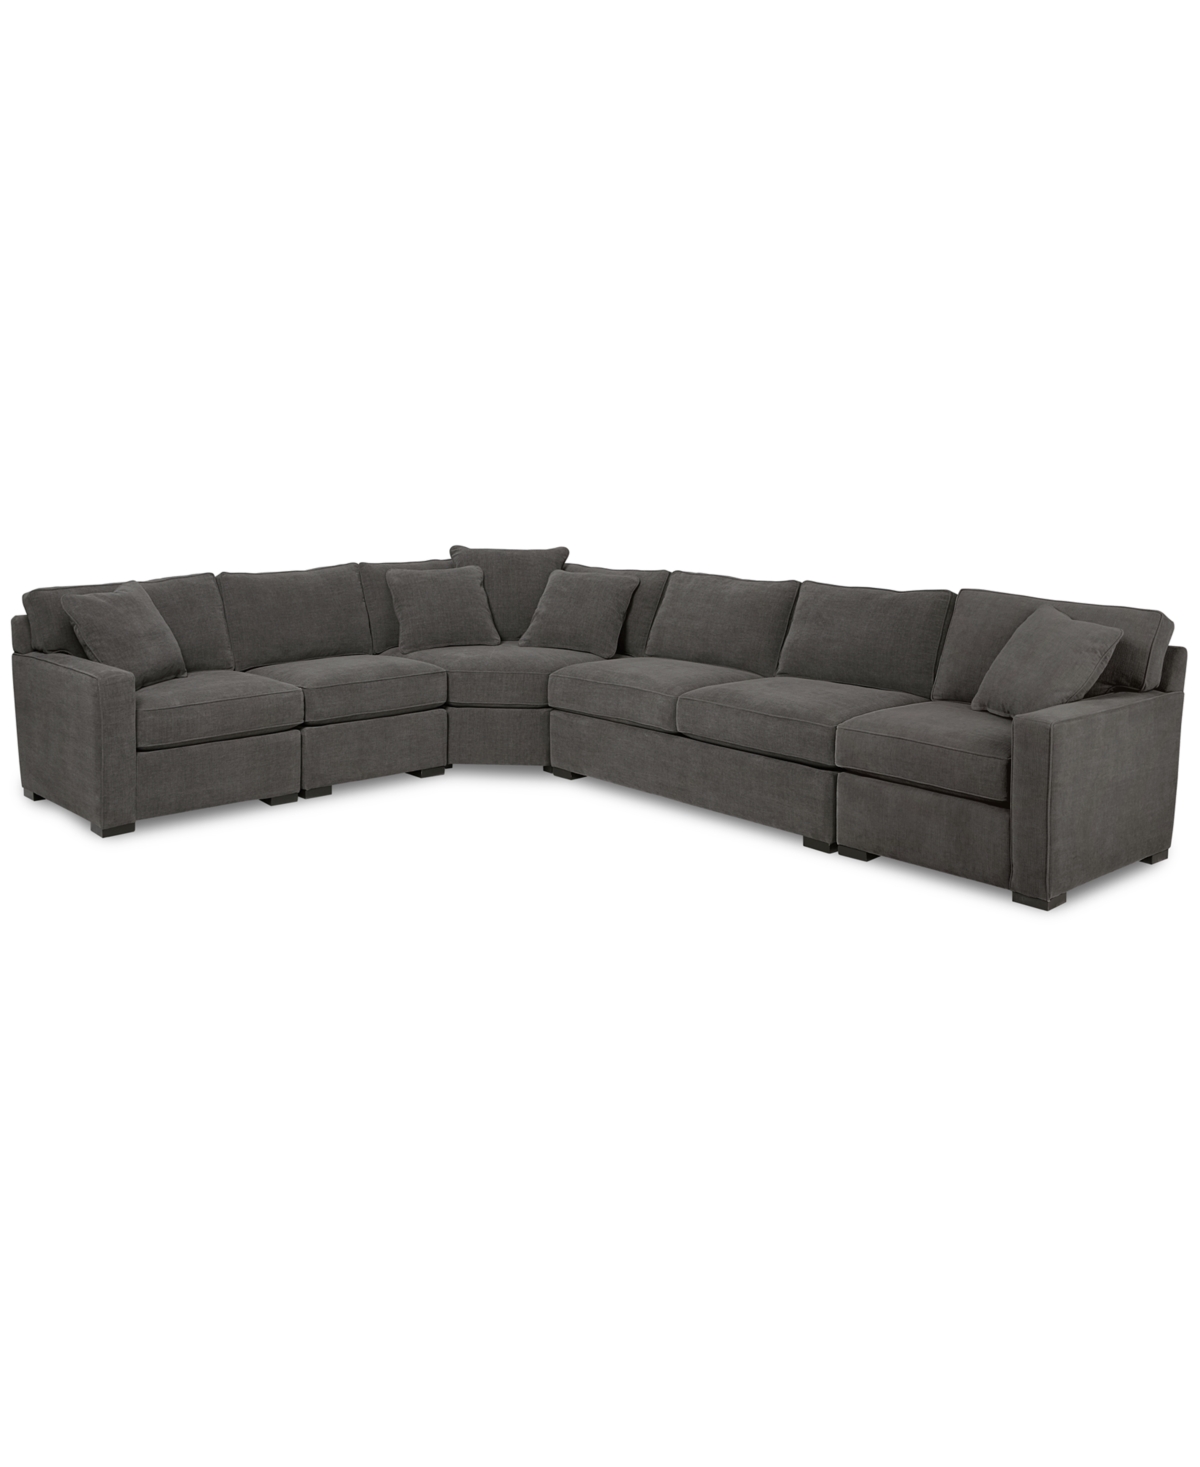 Radley 5-Pc Fabric Sectional with Apartment Sofa, Created for Macys